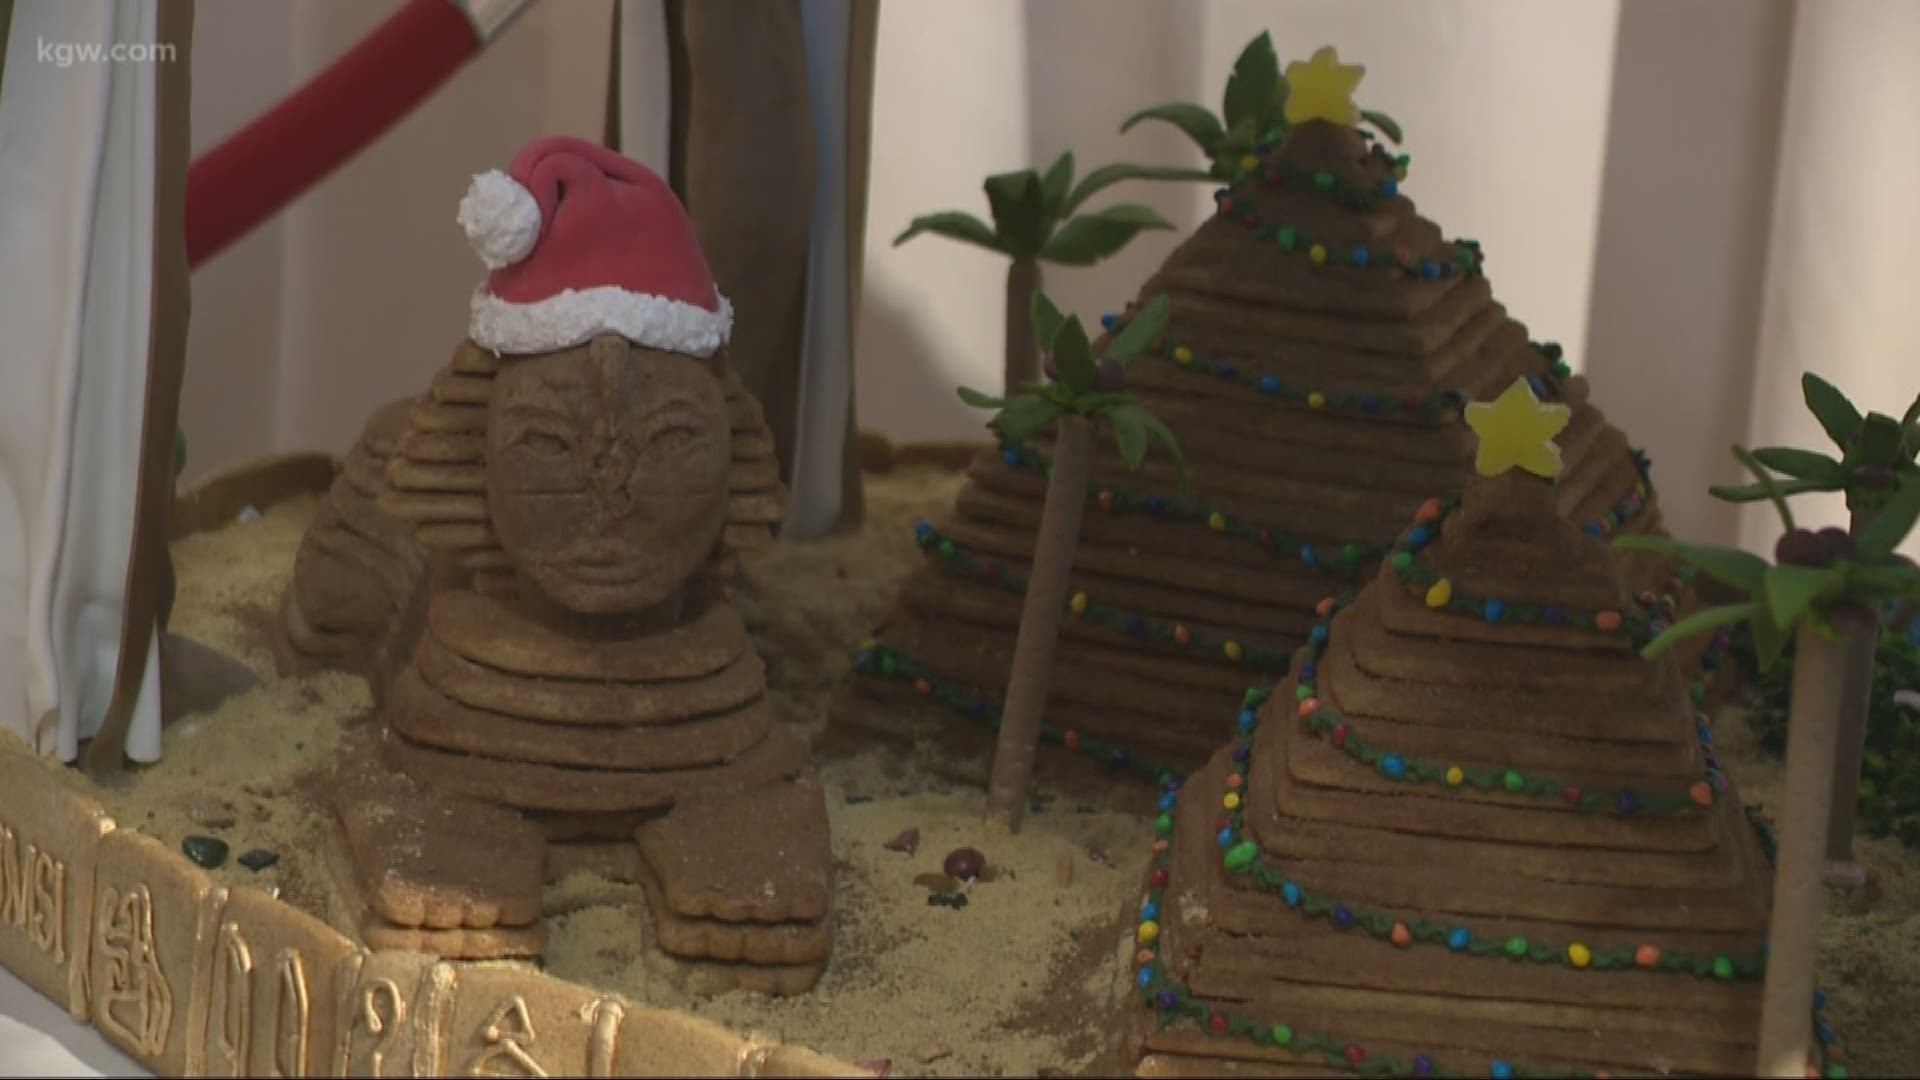 Intricate gingerbread designs now at OMSI